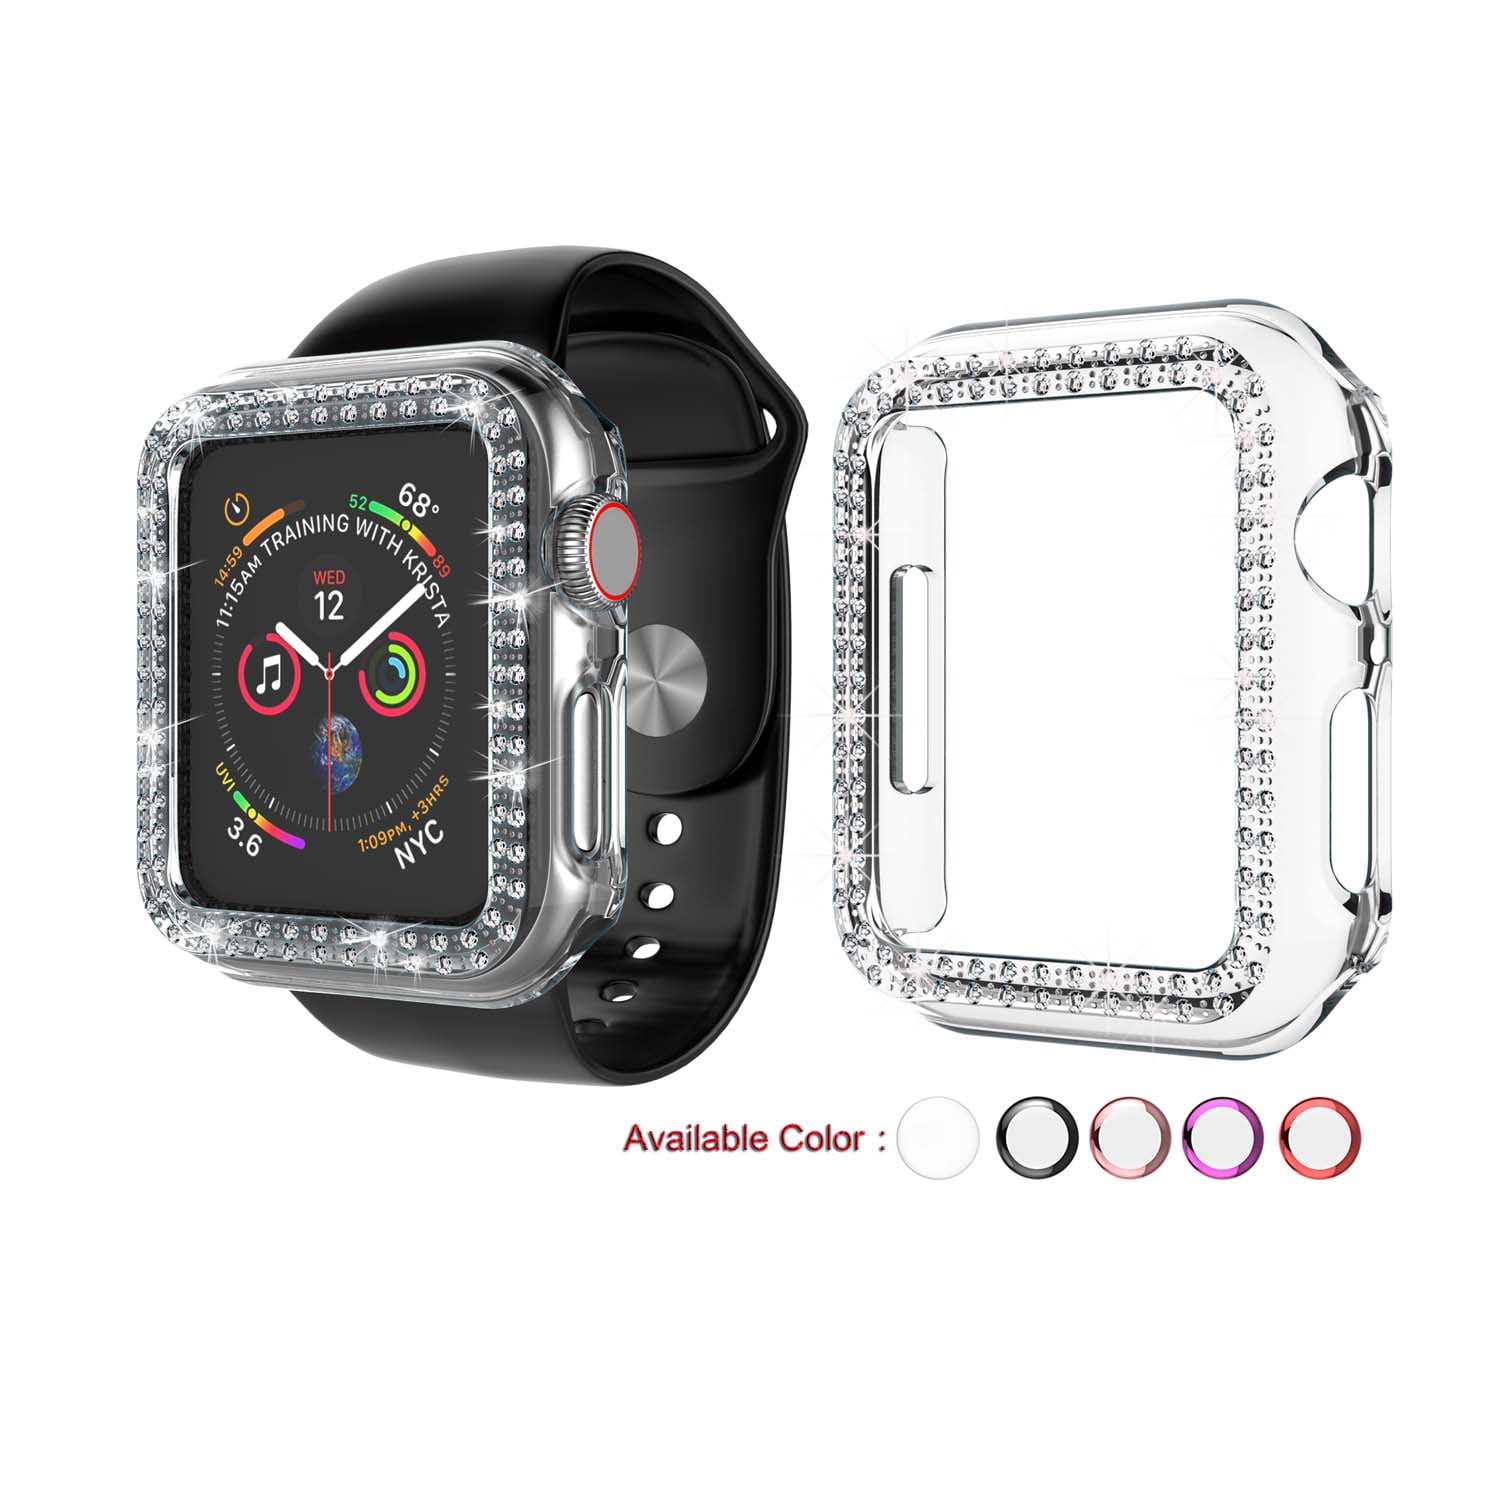 Njjex Cases for Apple Watch Case Series 3 42mm, PC Plated Hard Bumper Bling  Crystal Diamonds Glitter Frame Protective Cover for iWatch Series 3 Series 